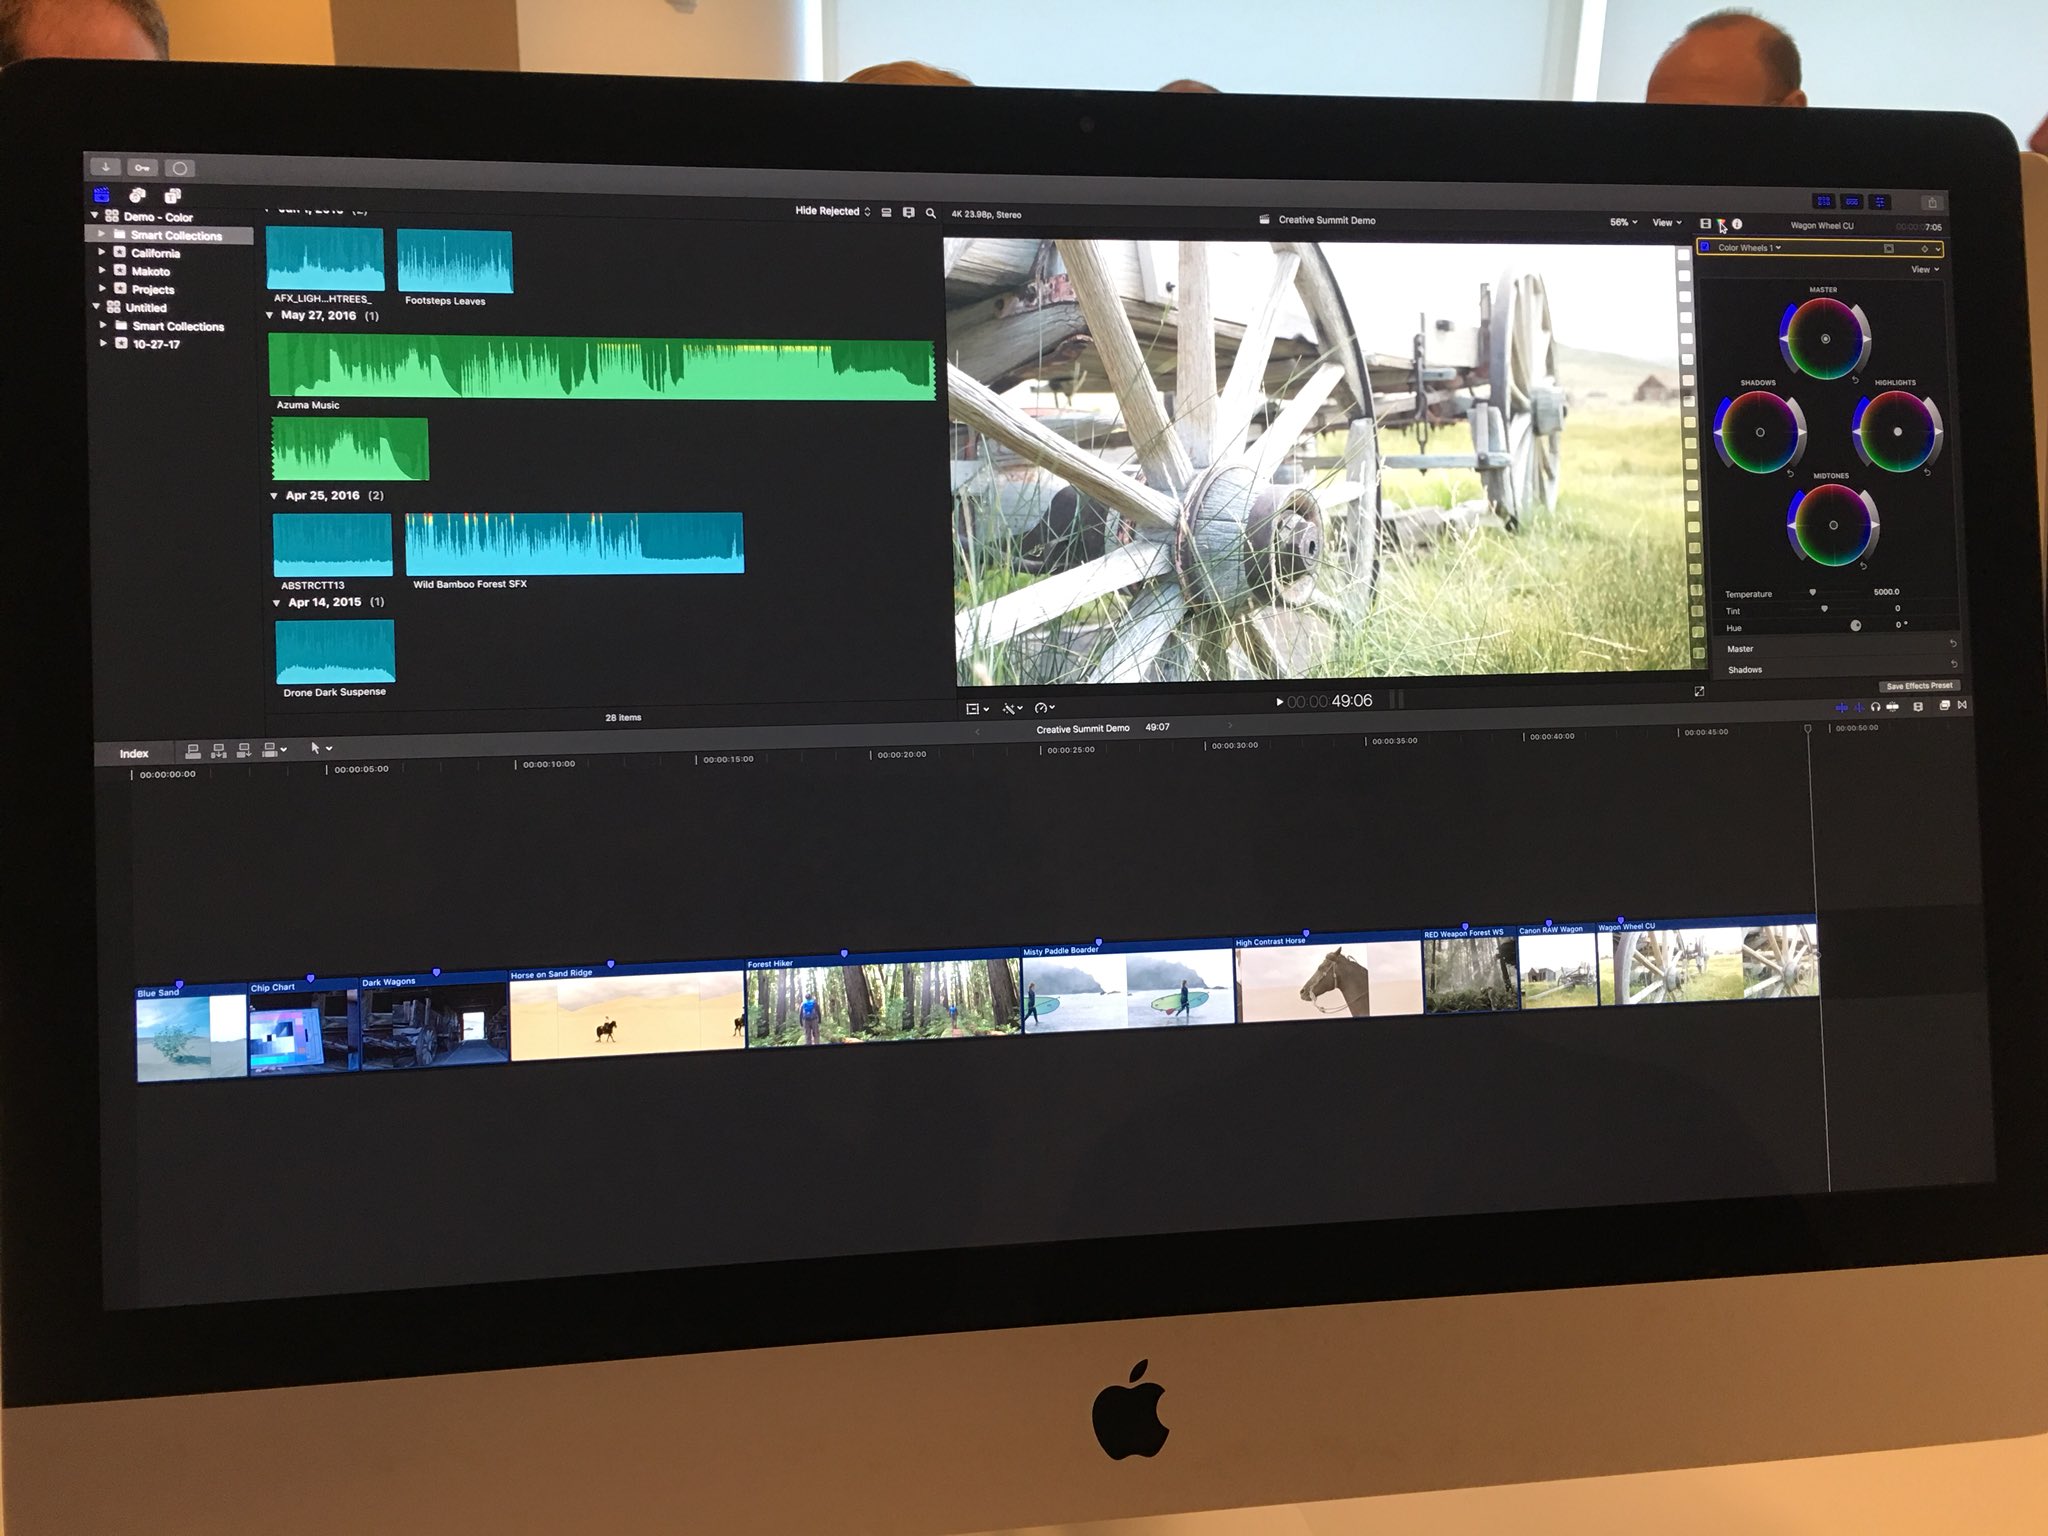 fcpx 10.4